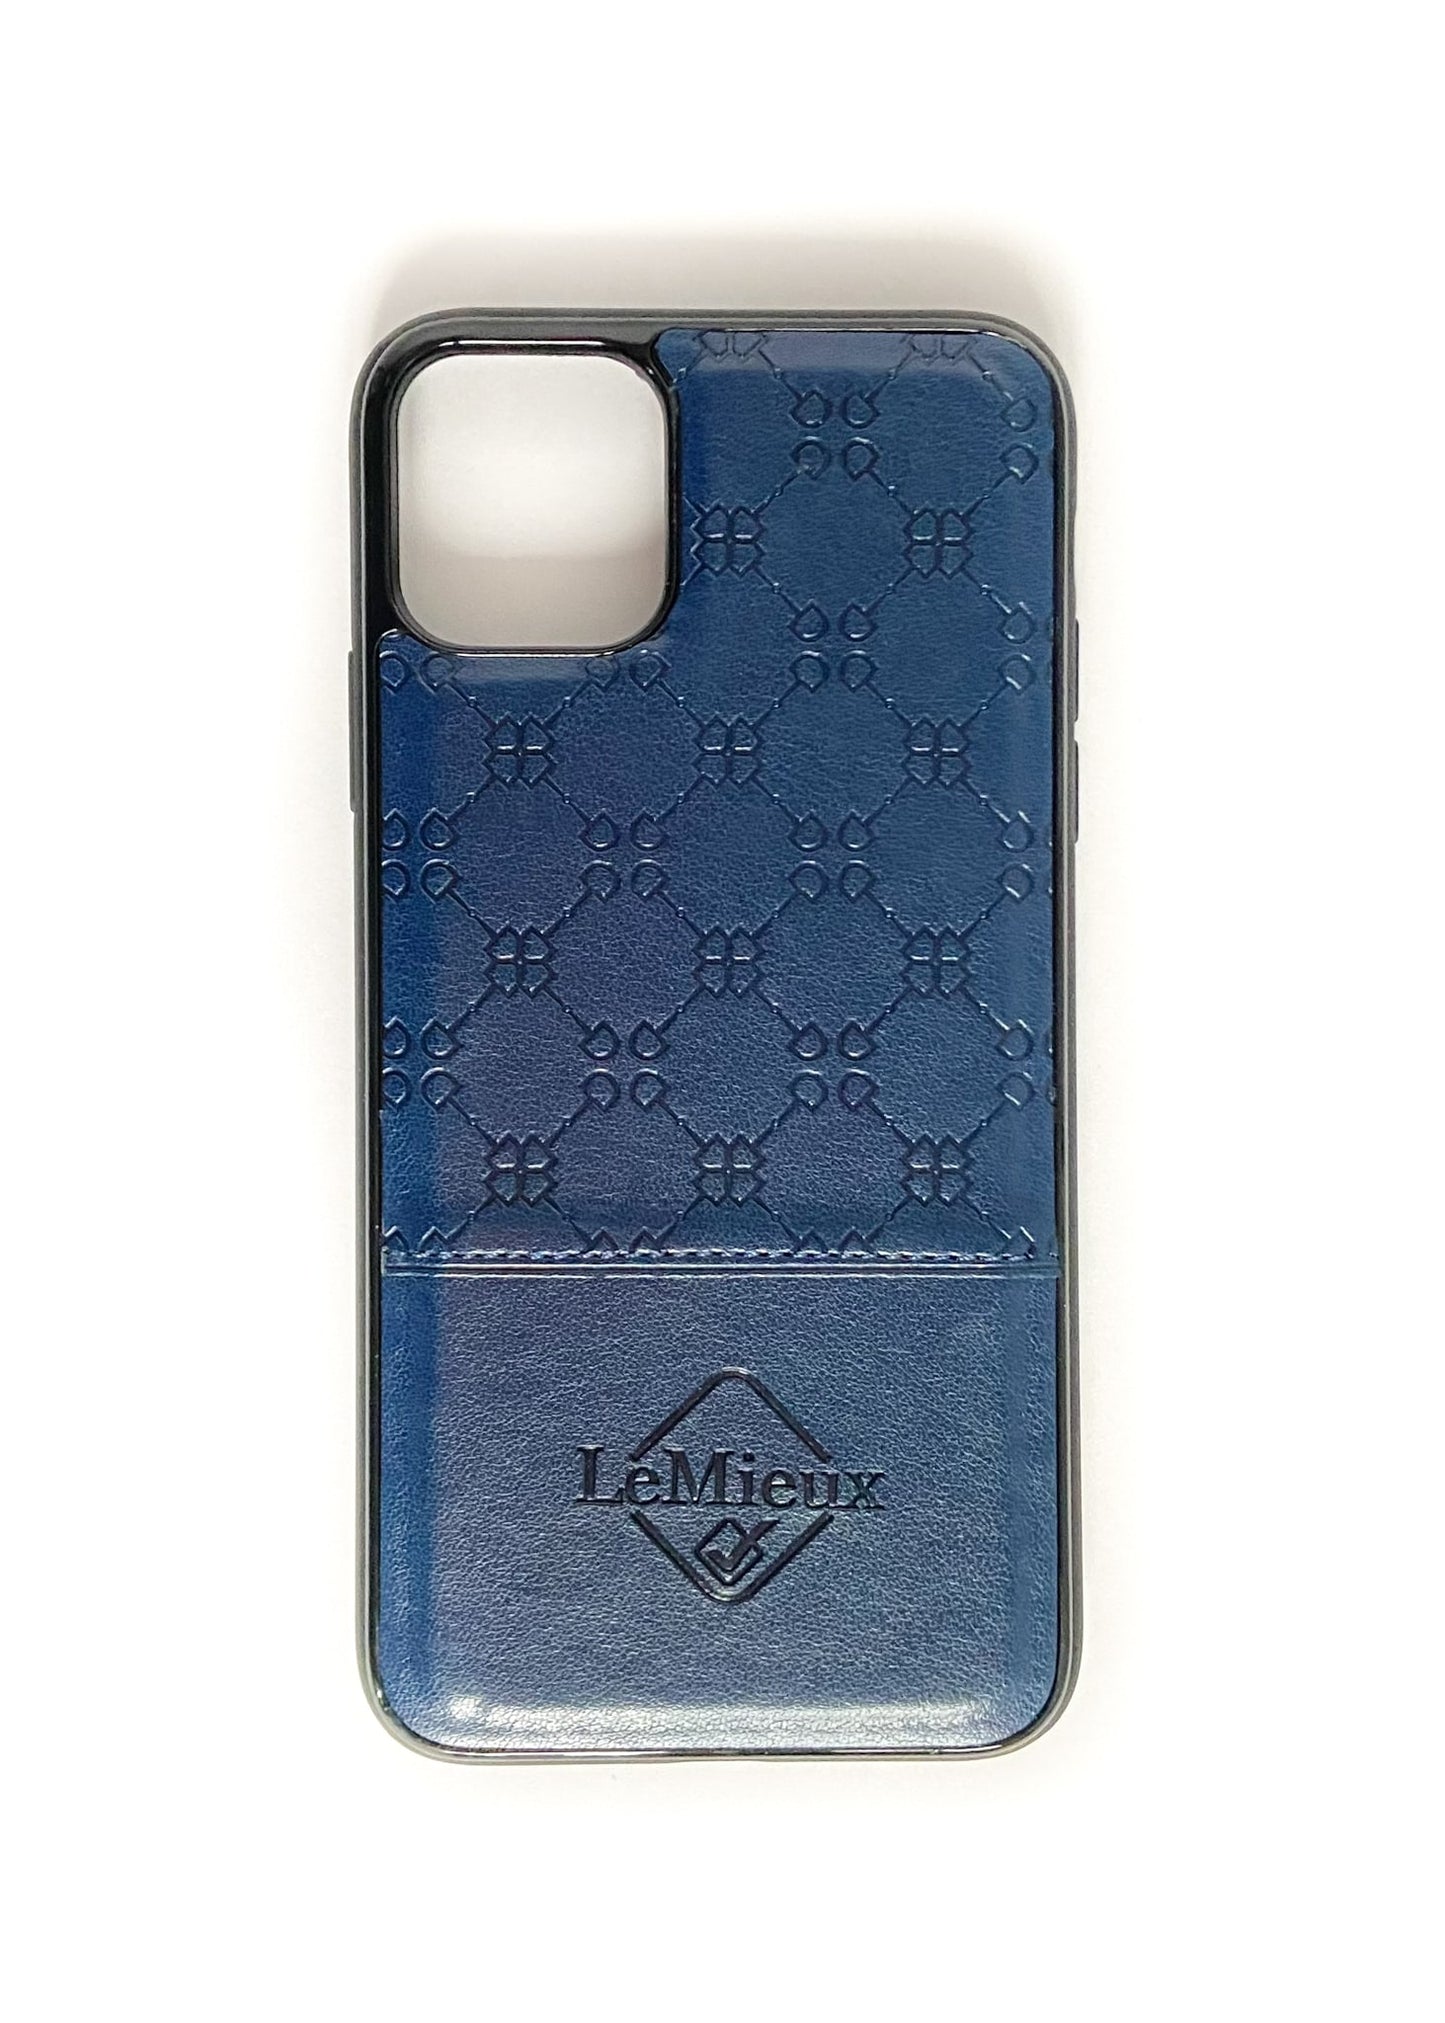 Lemieux Luxe iPhone Case - Navy - 11 Pro Max/XS Max